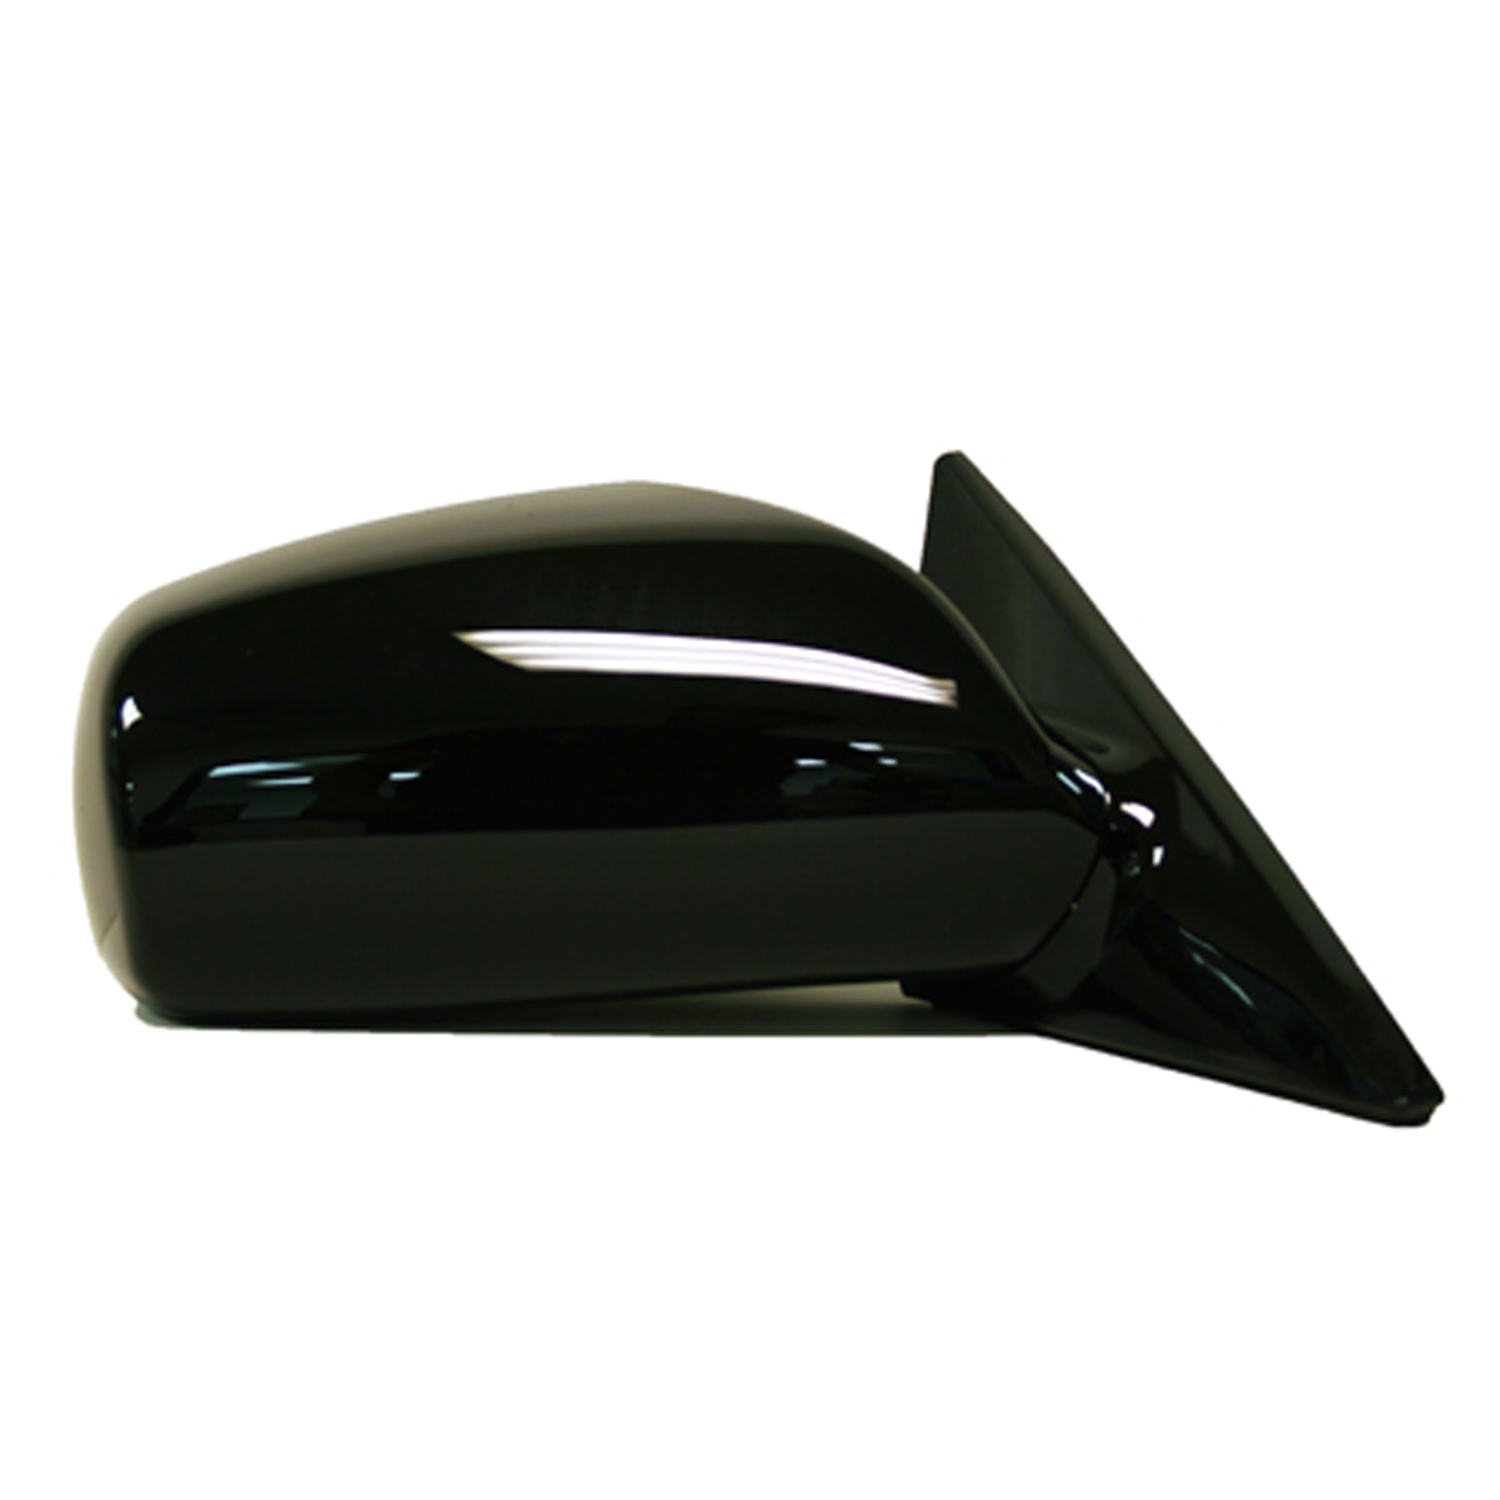 for 2004 - 2008 Toyota Solara Side View Mirror - Left (Driver) - 2007 2006 2005 | eBay 2006 Toyota Solara Passenger Side Mirror Replacement